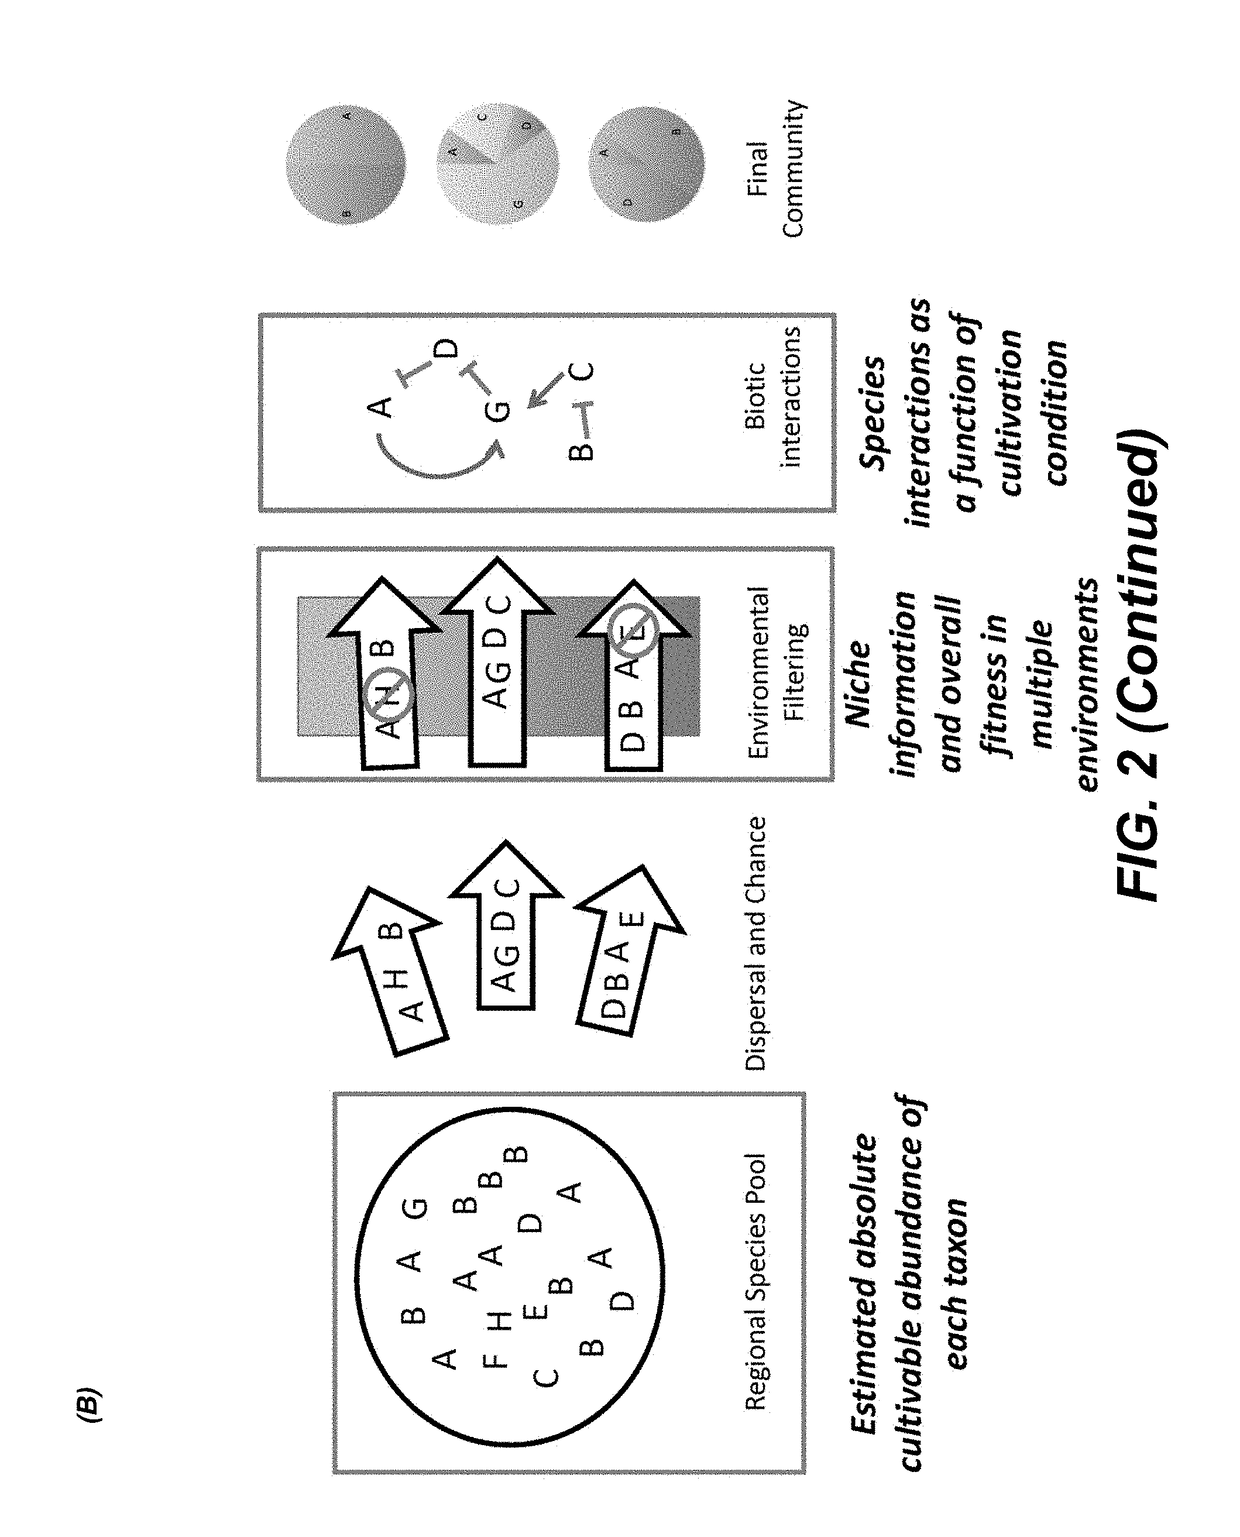 Methods for identifying interactions amongst microorganisms